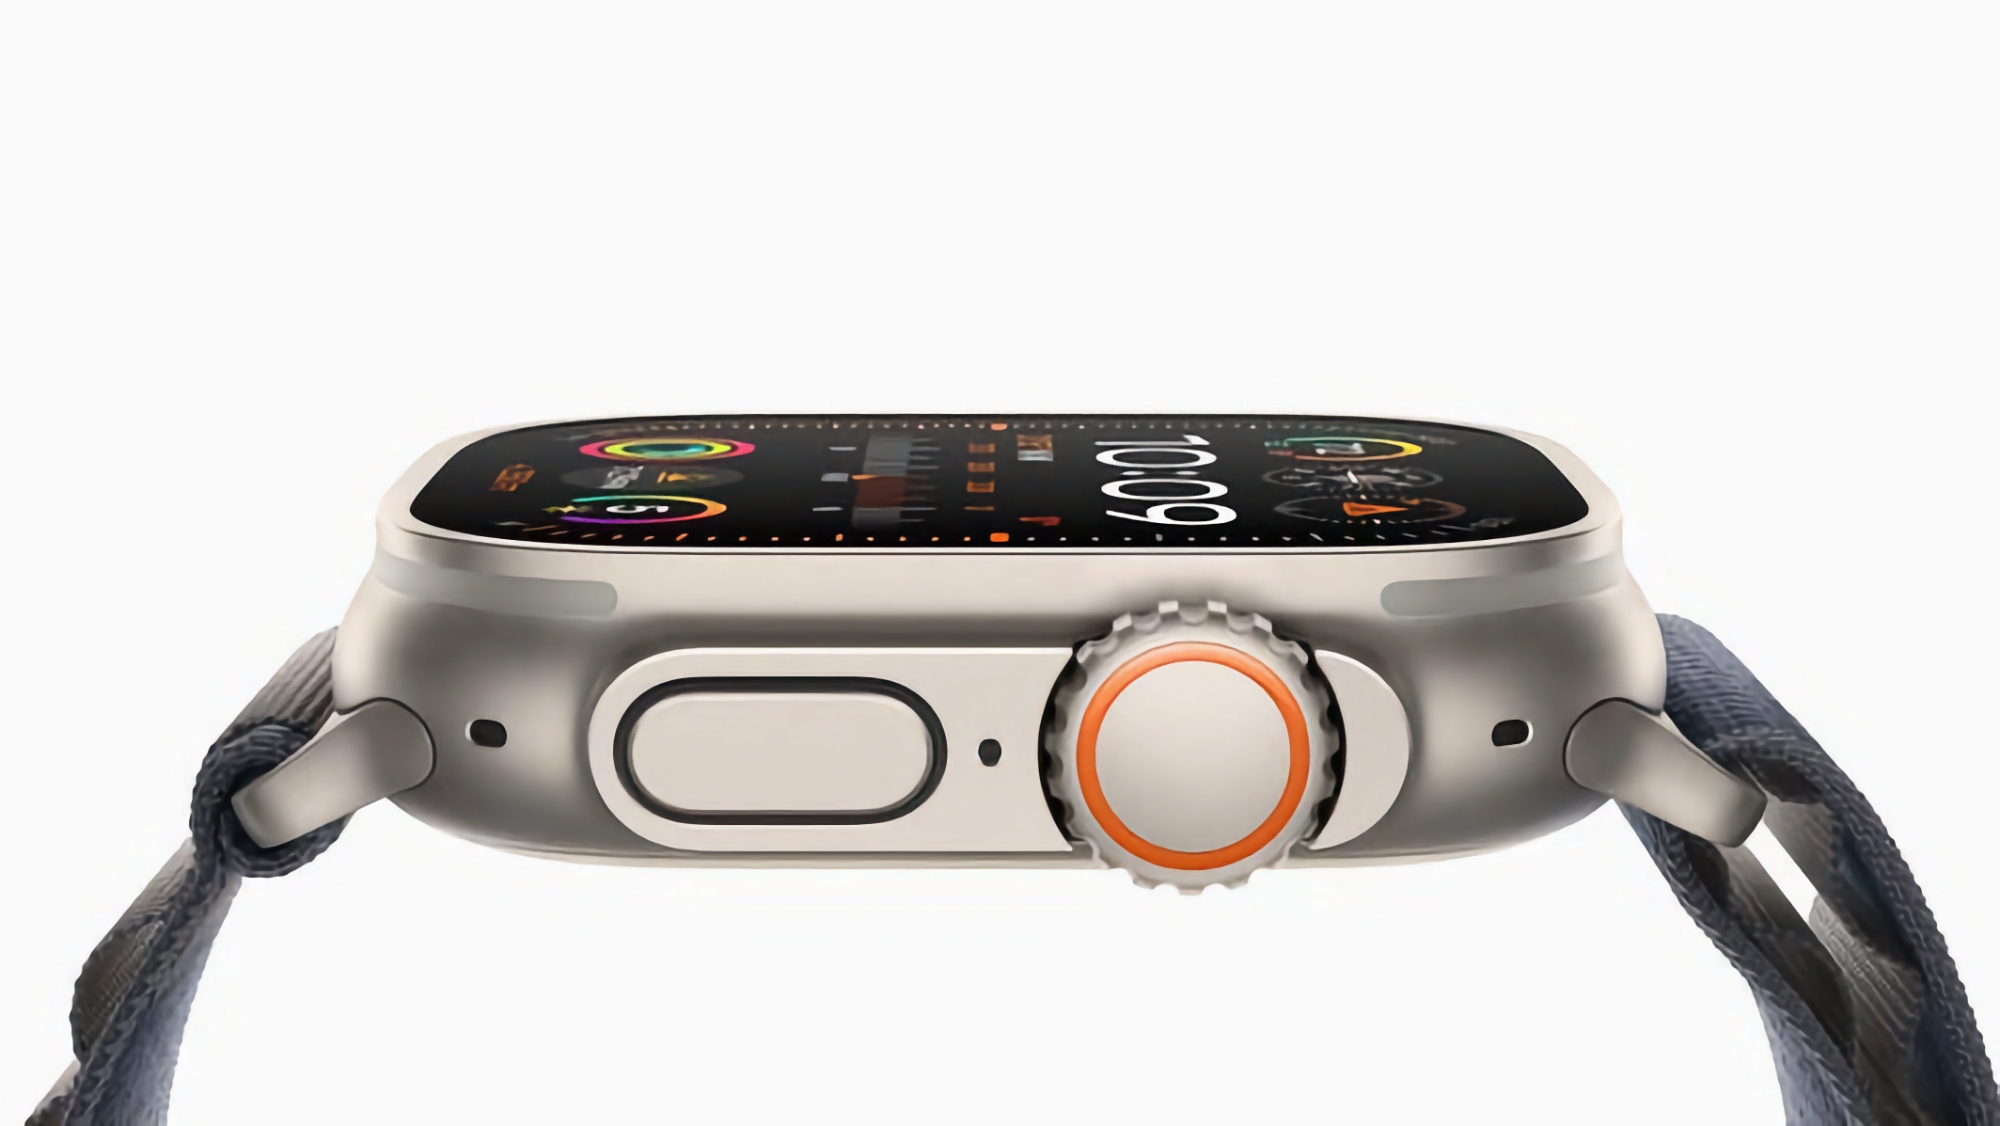 Bloomberg: Apple Watch Ultra 3 won't get dramatic design changes